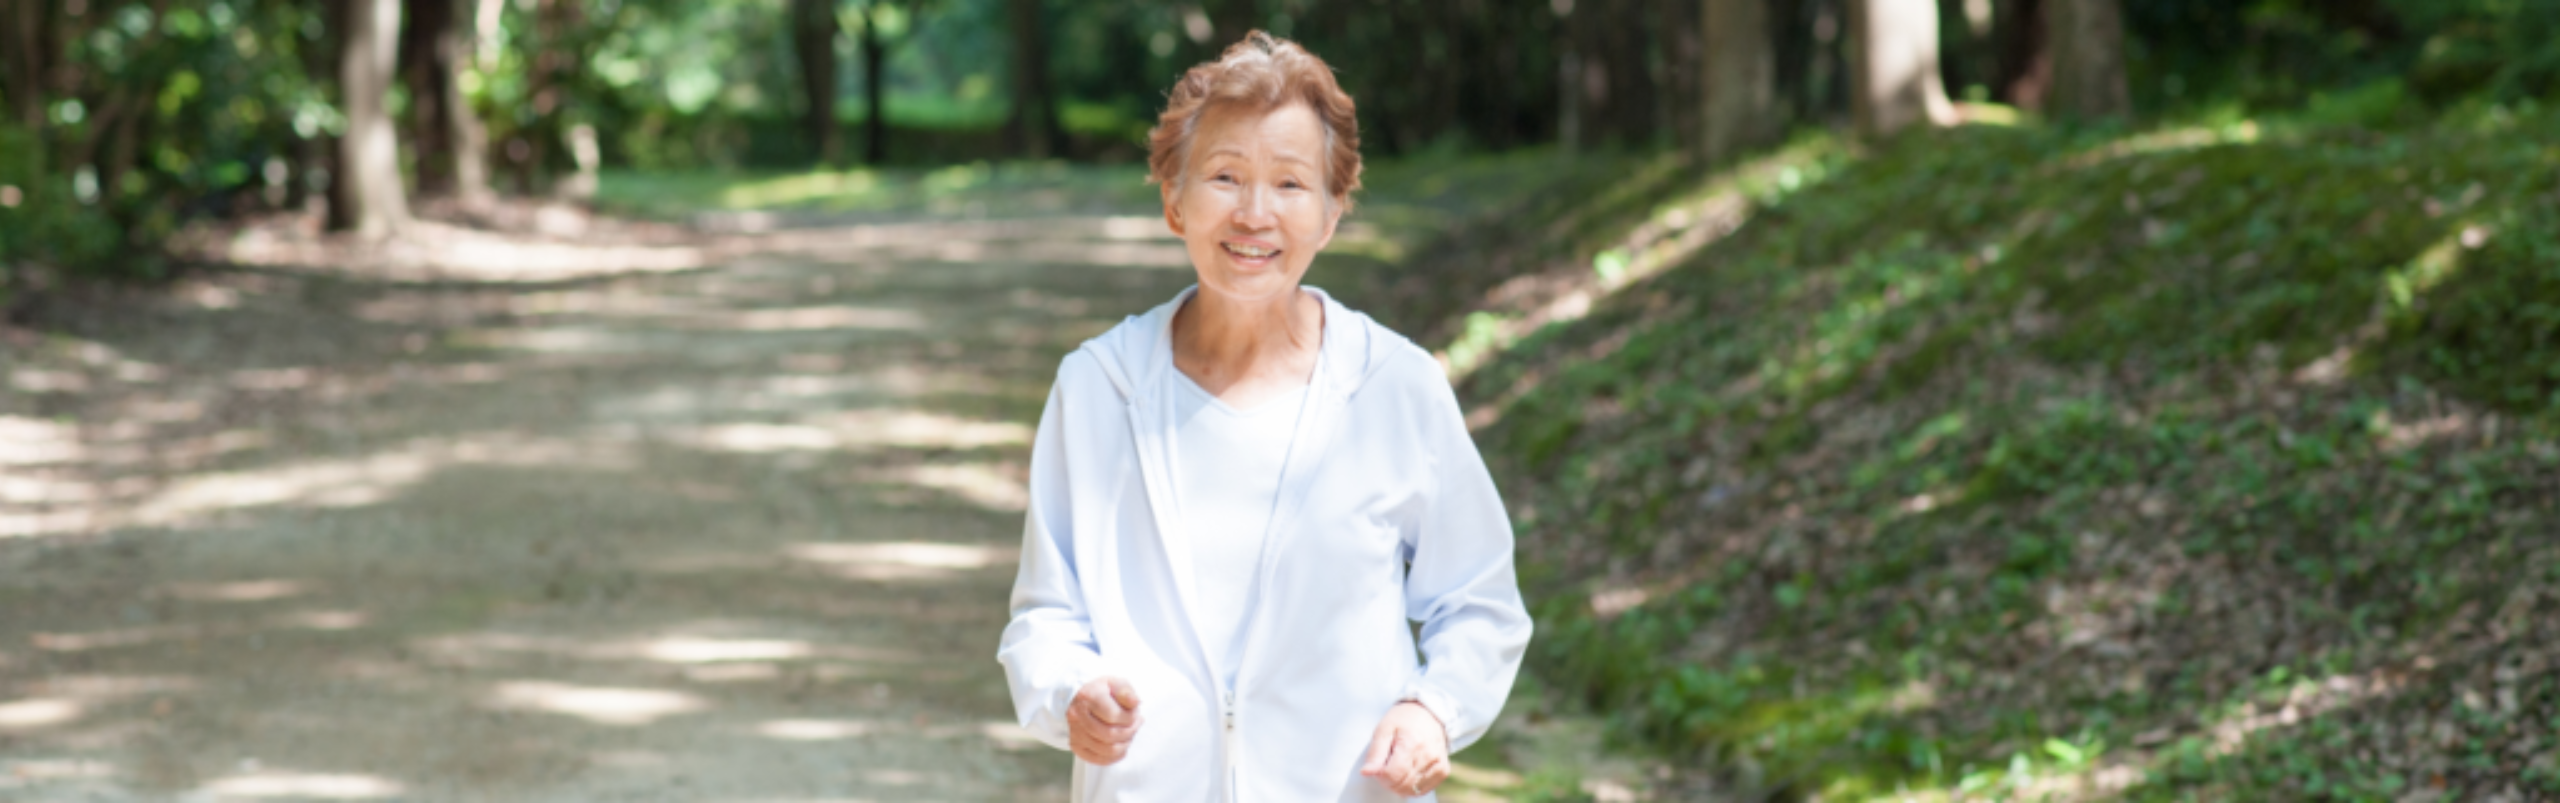 Senior Asian woman on a walking trail outside independent apartment home